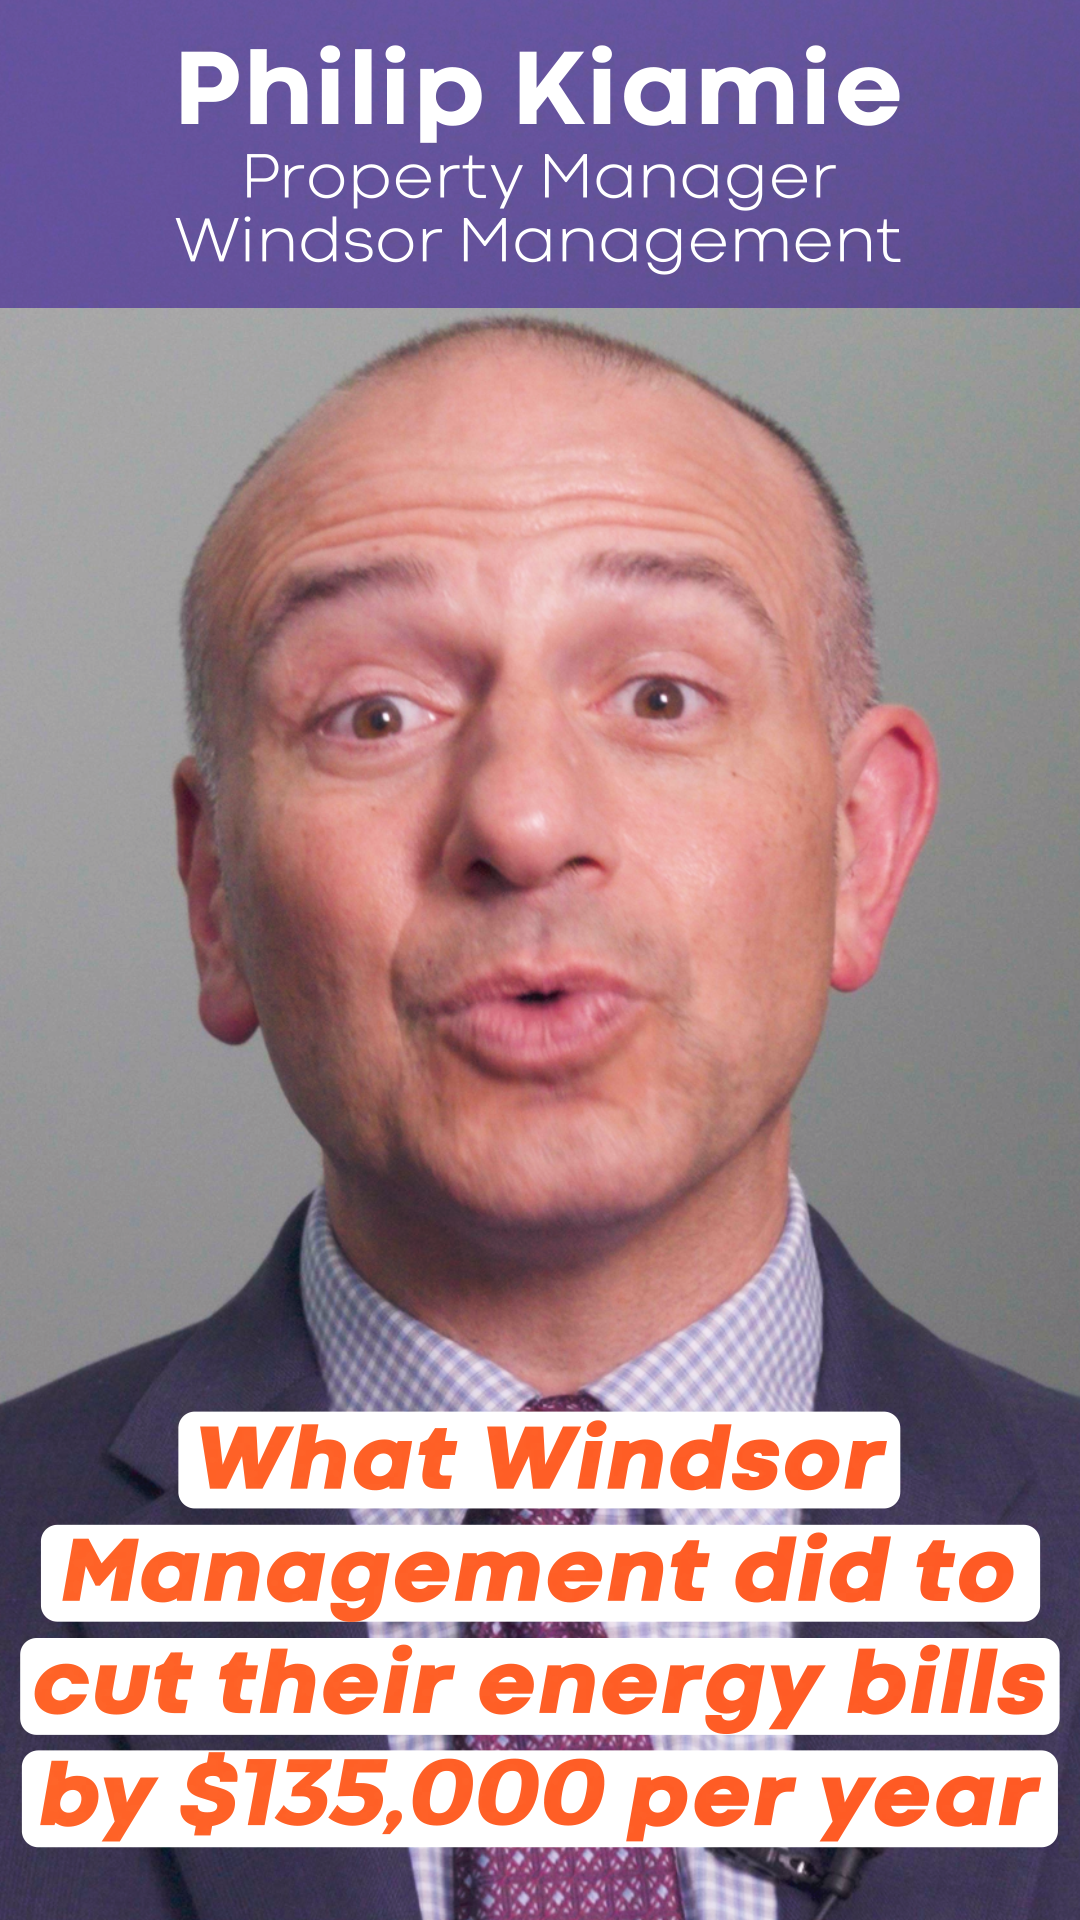 How Windsor Management cut their energy bills by $135,000 per year